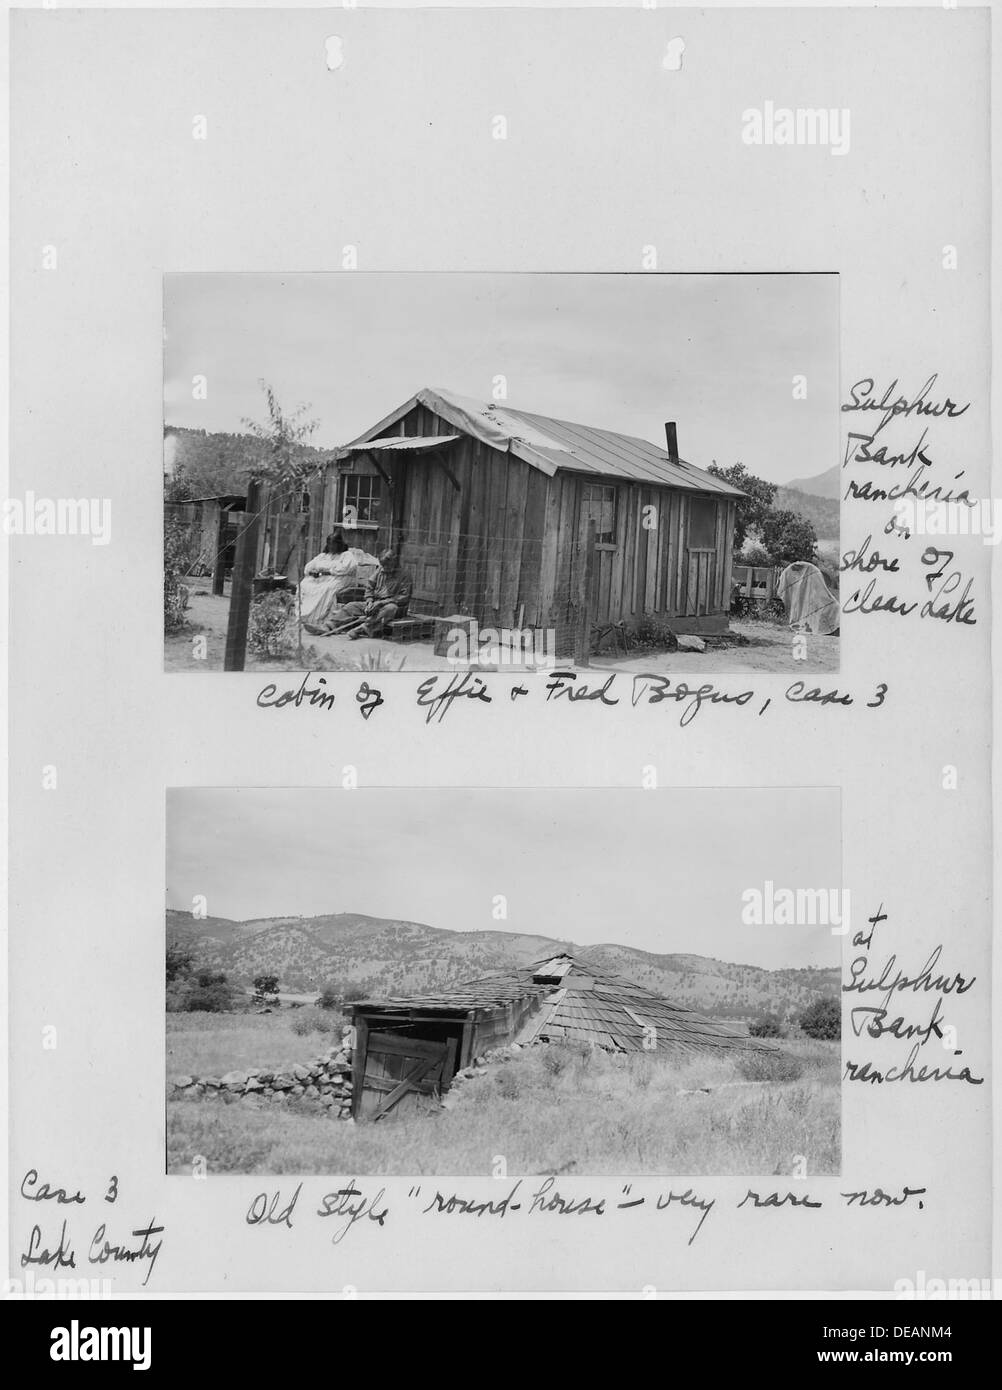 Photographs, with captions, of homes at Sulphur Bank Rancheria, Lake County, California, from Old Age Security 296277 Stock Photo